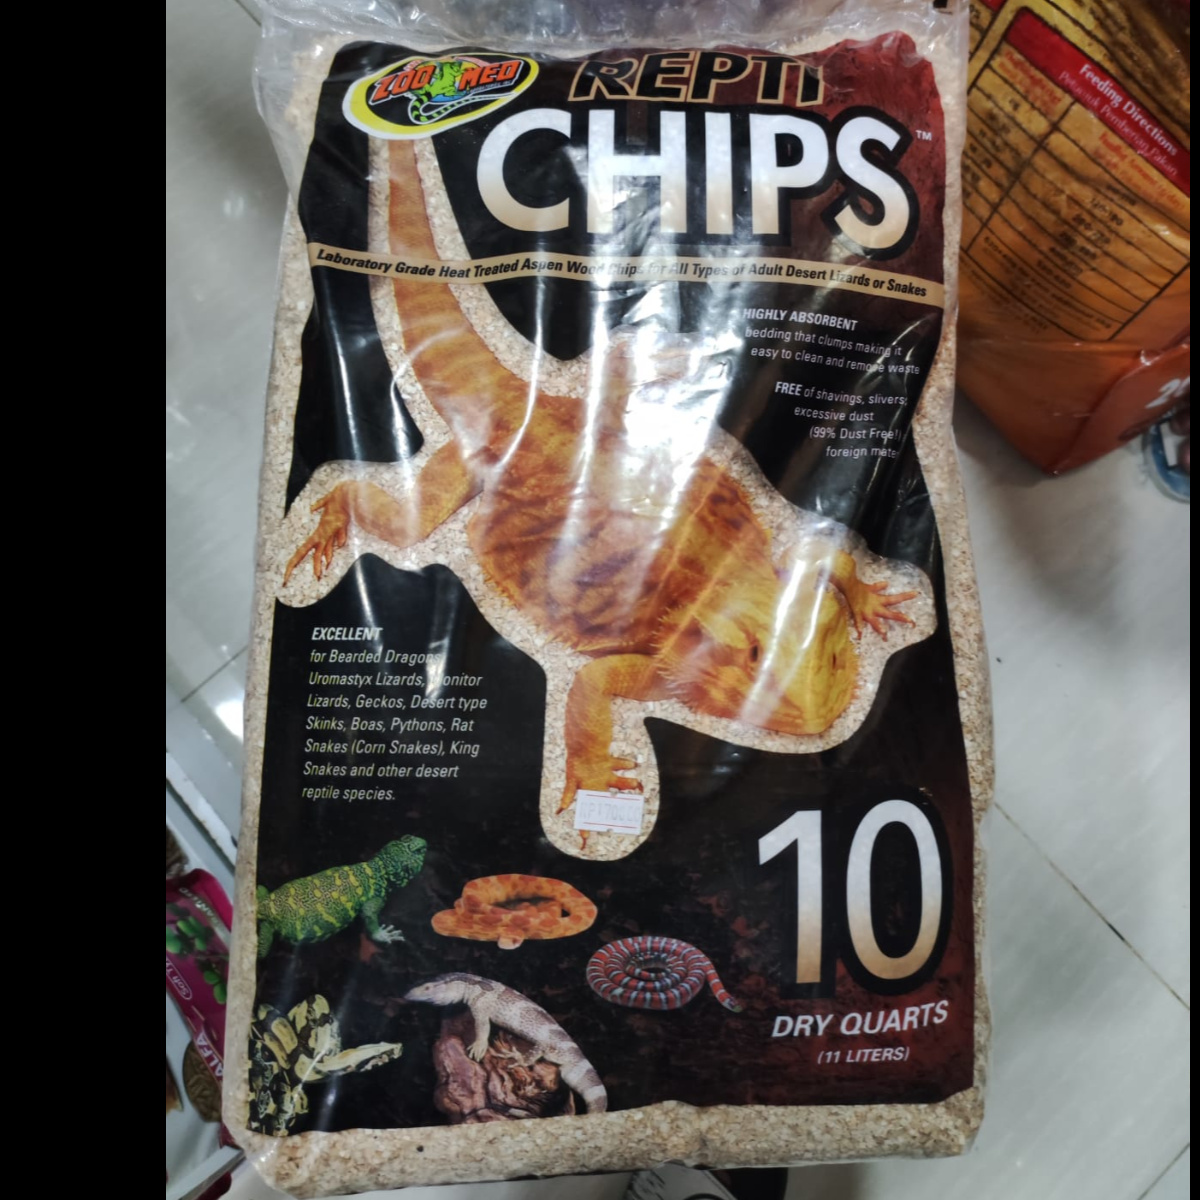 Repti Chips